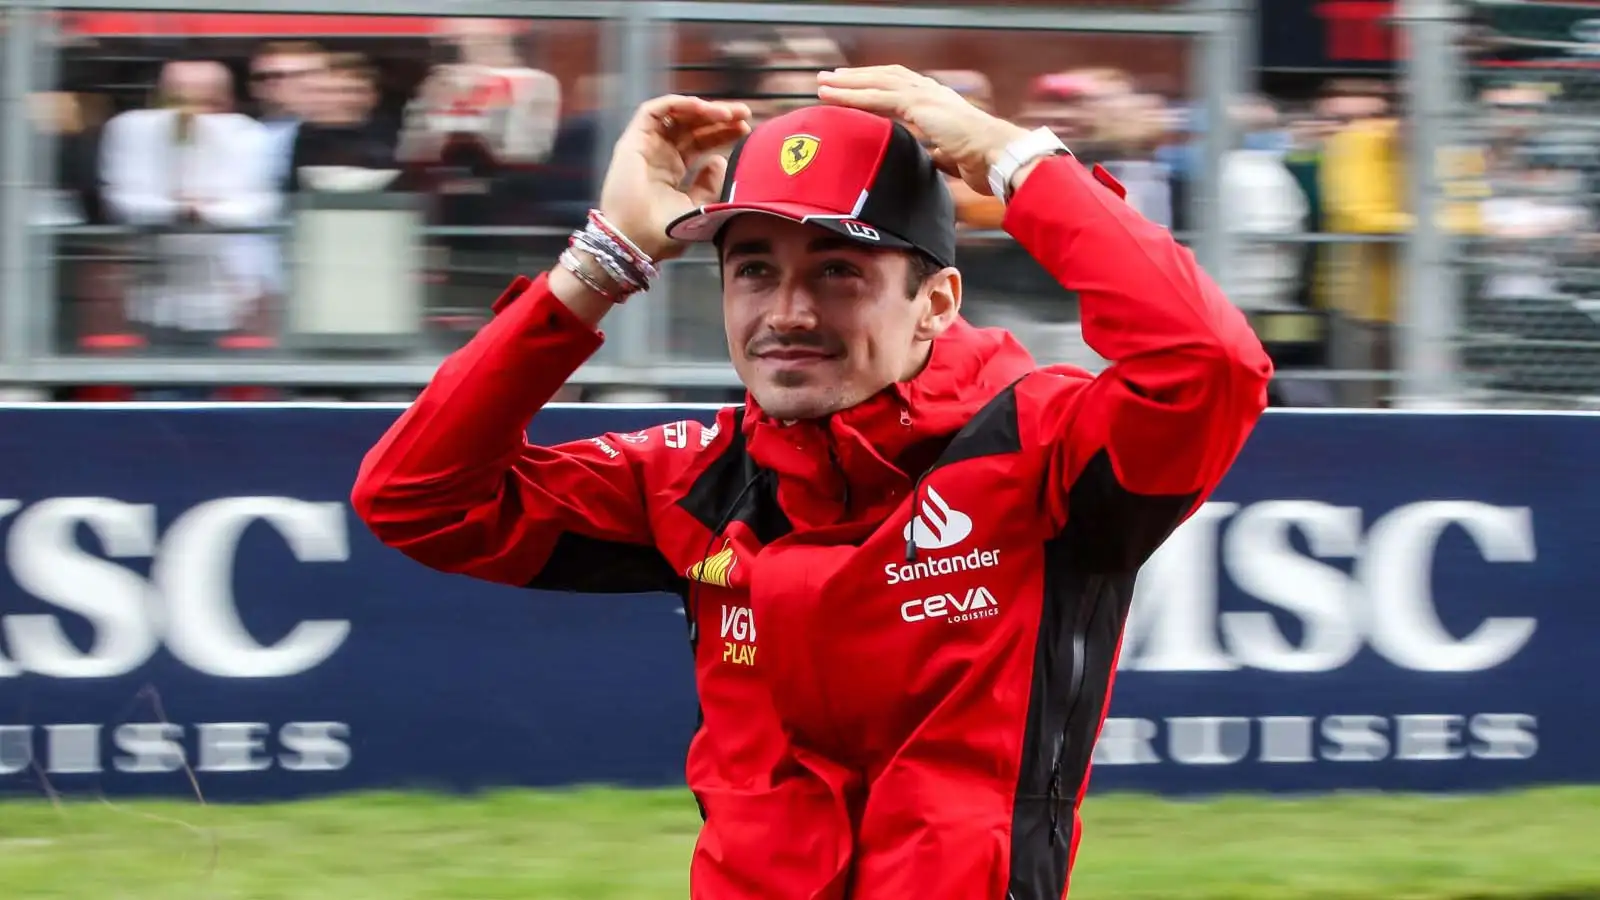 Charles Leclerc during the drivers parade.